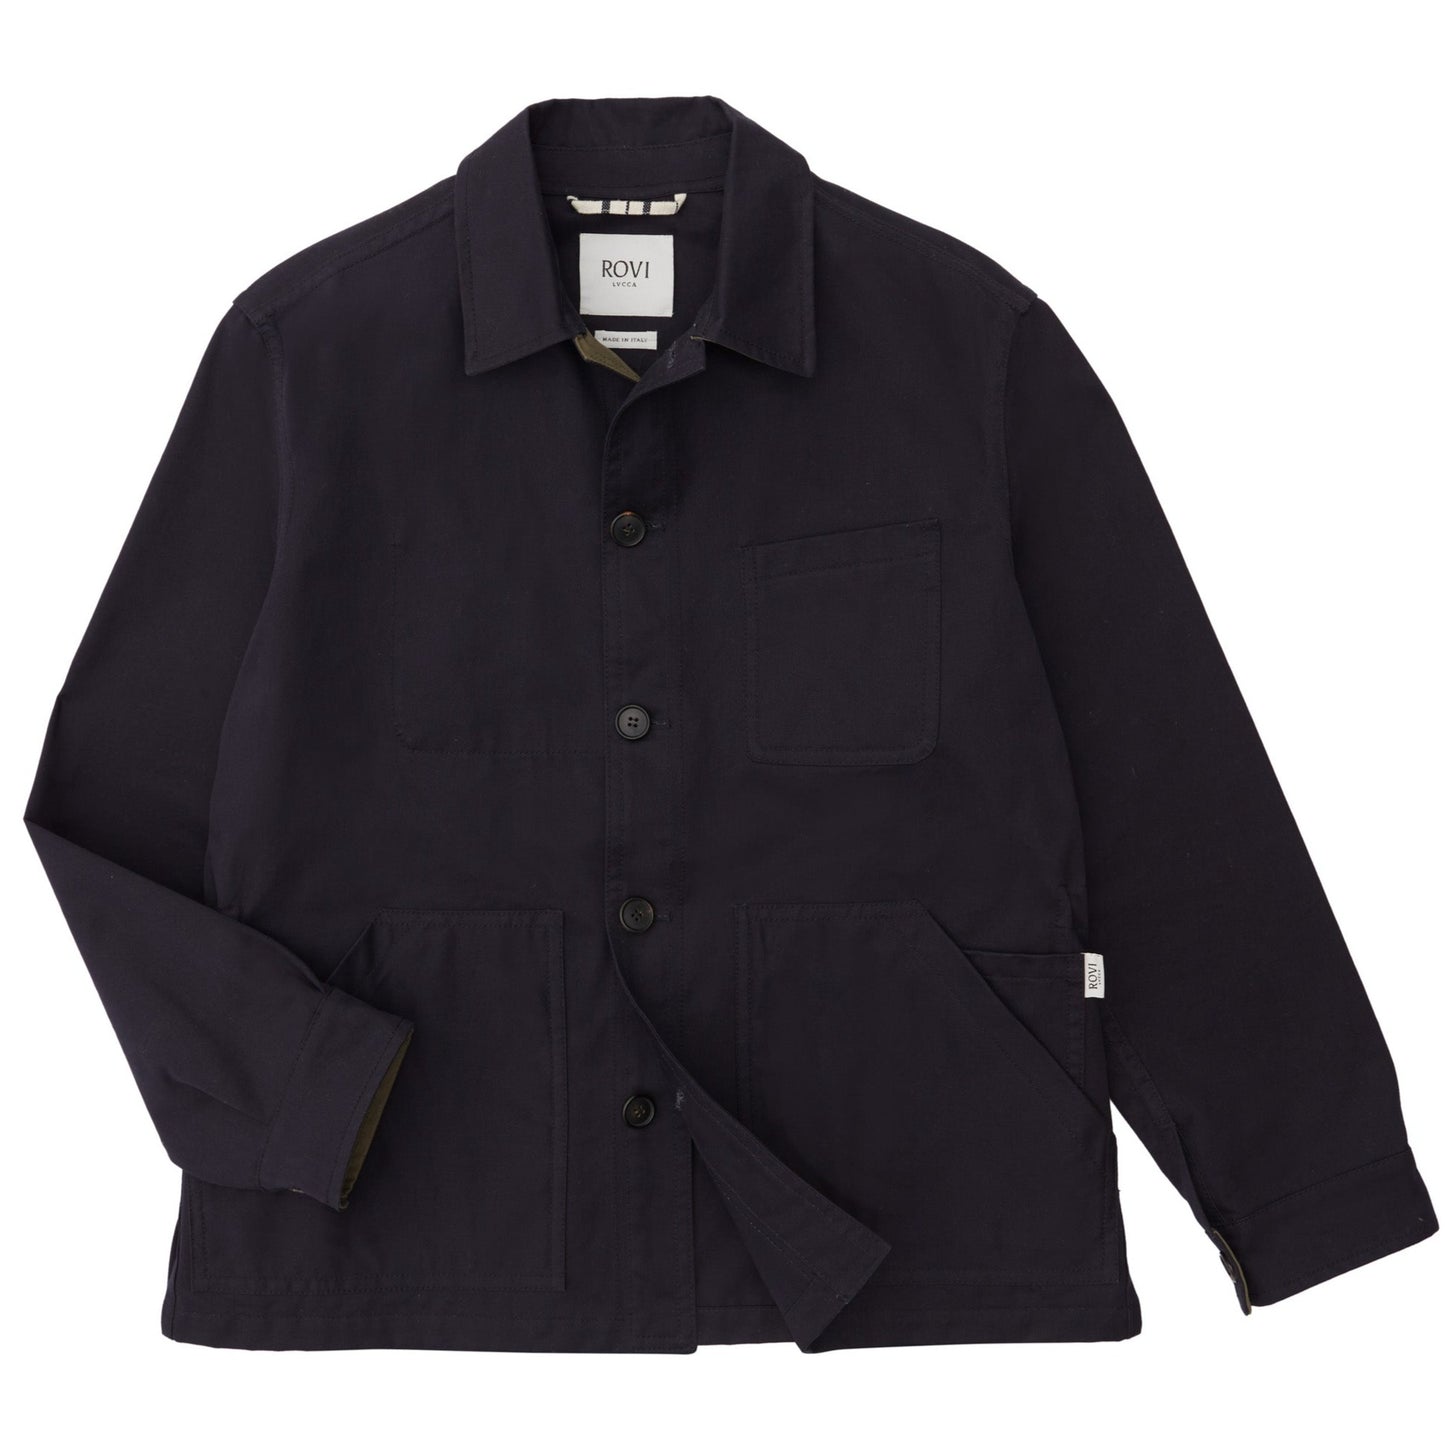 Unlined Garden Jacket in Navy and Green Cotton Twill